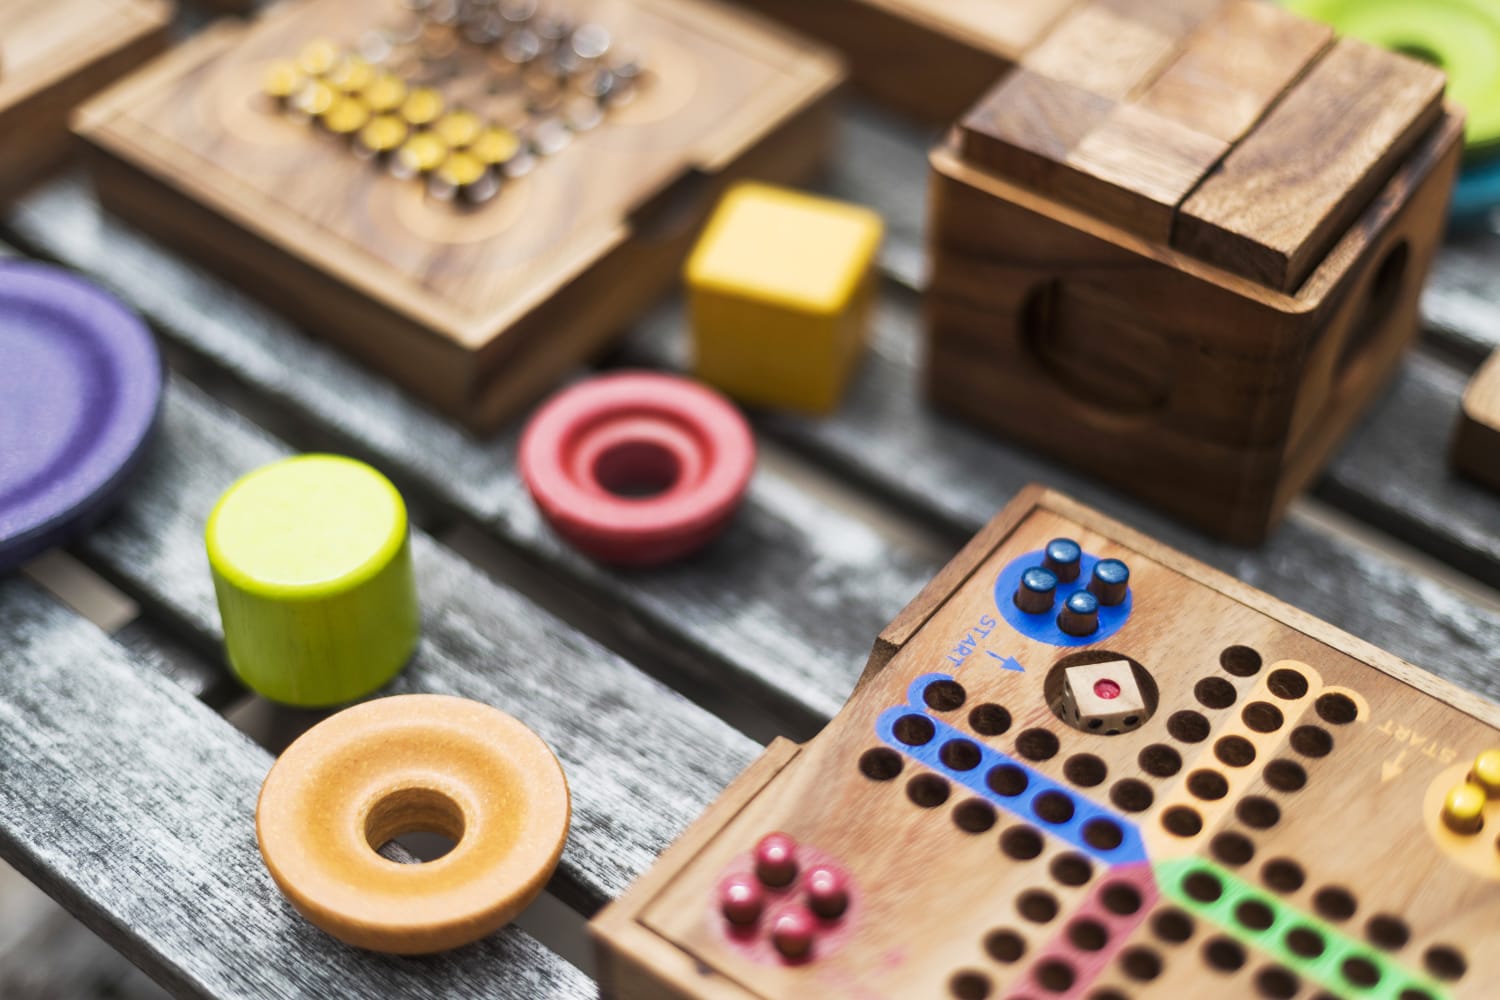 The Benefits of Puzzles as an Educational Toy for Children